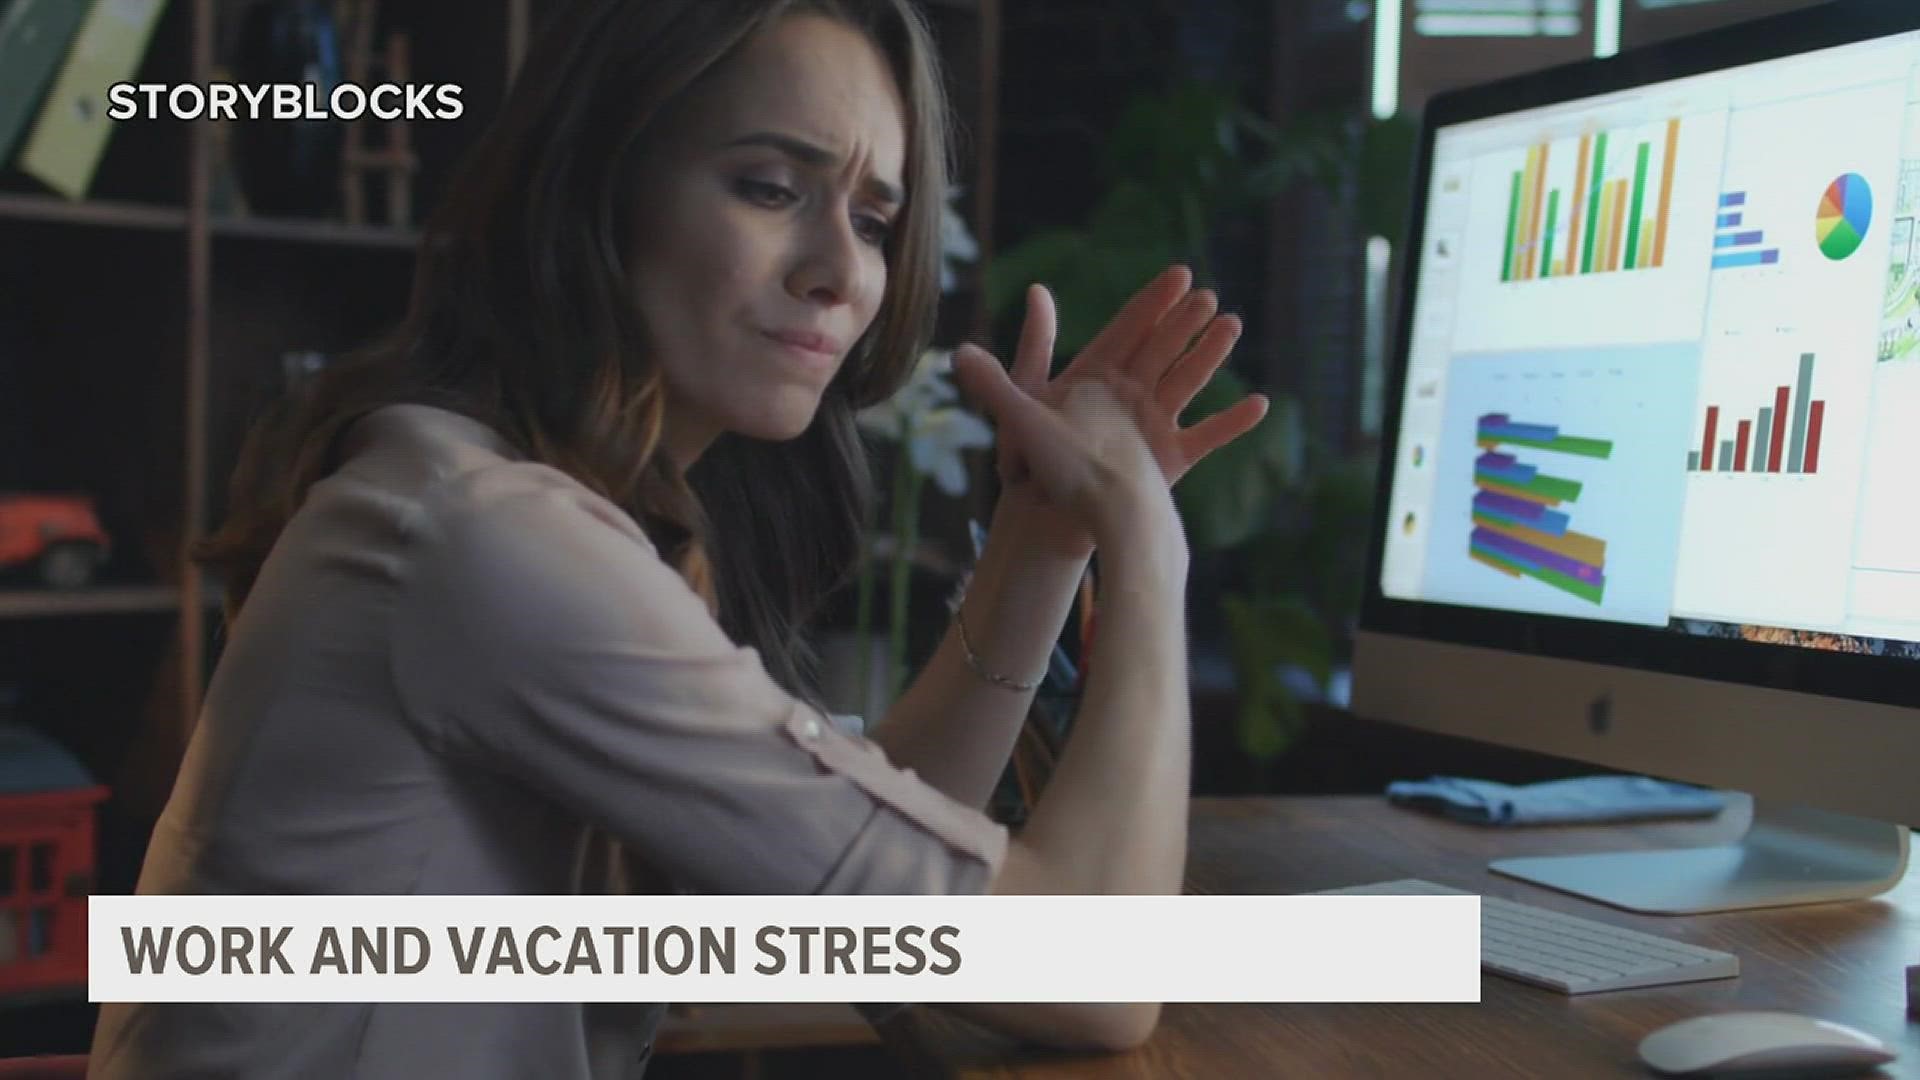 A local mental health expert weighs in on causes behind the stress of work and vacation balance, and tips for employees and companies.